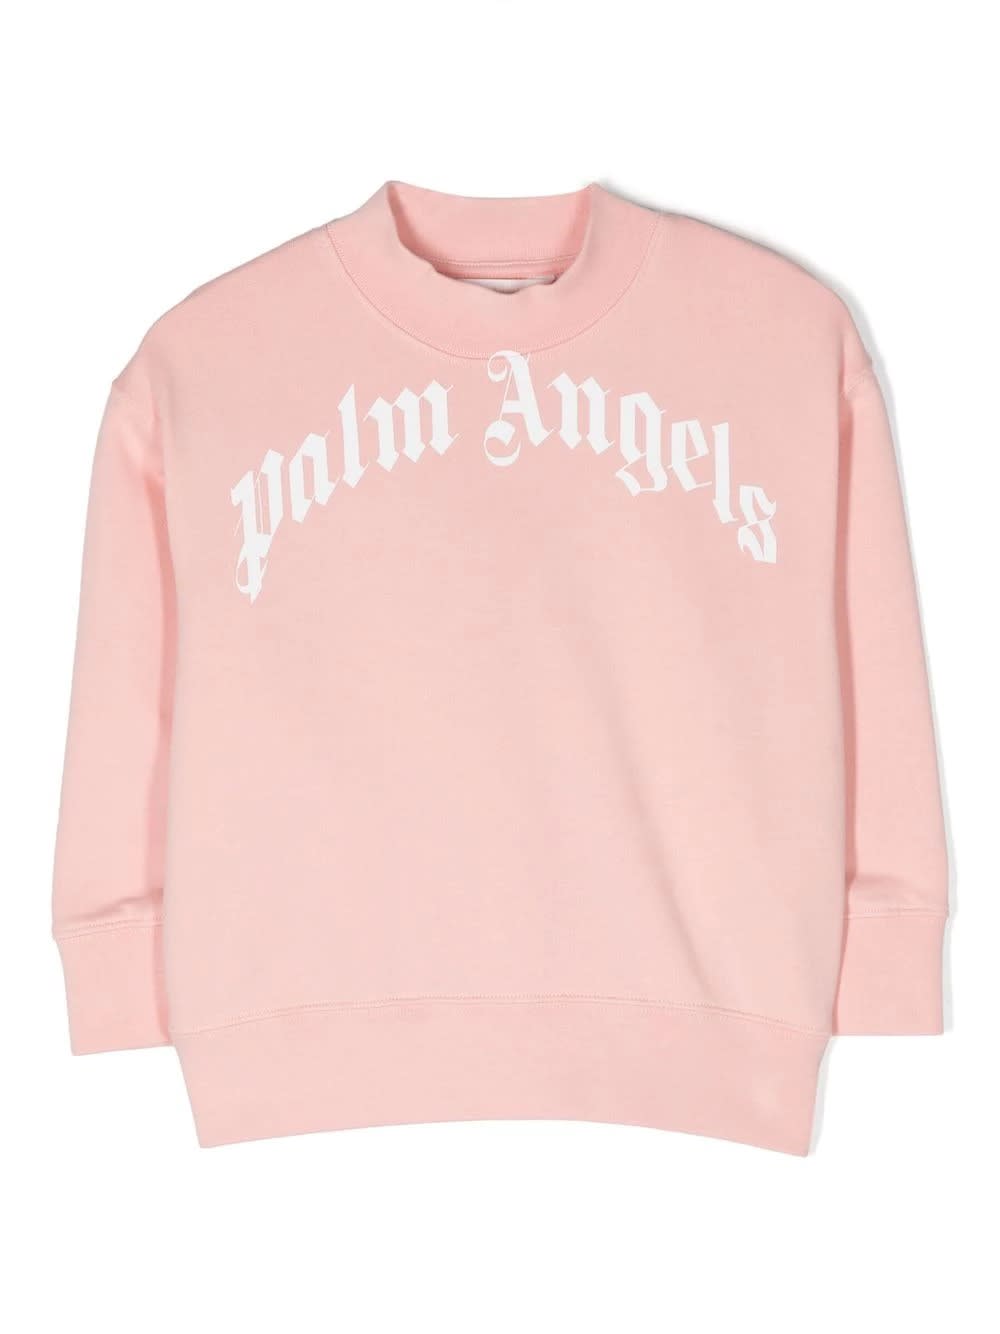 Palm Angels Pink Crew Neck Sweatshirt With Curved Logo